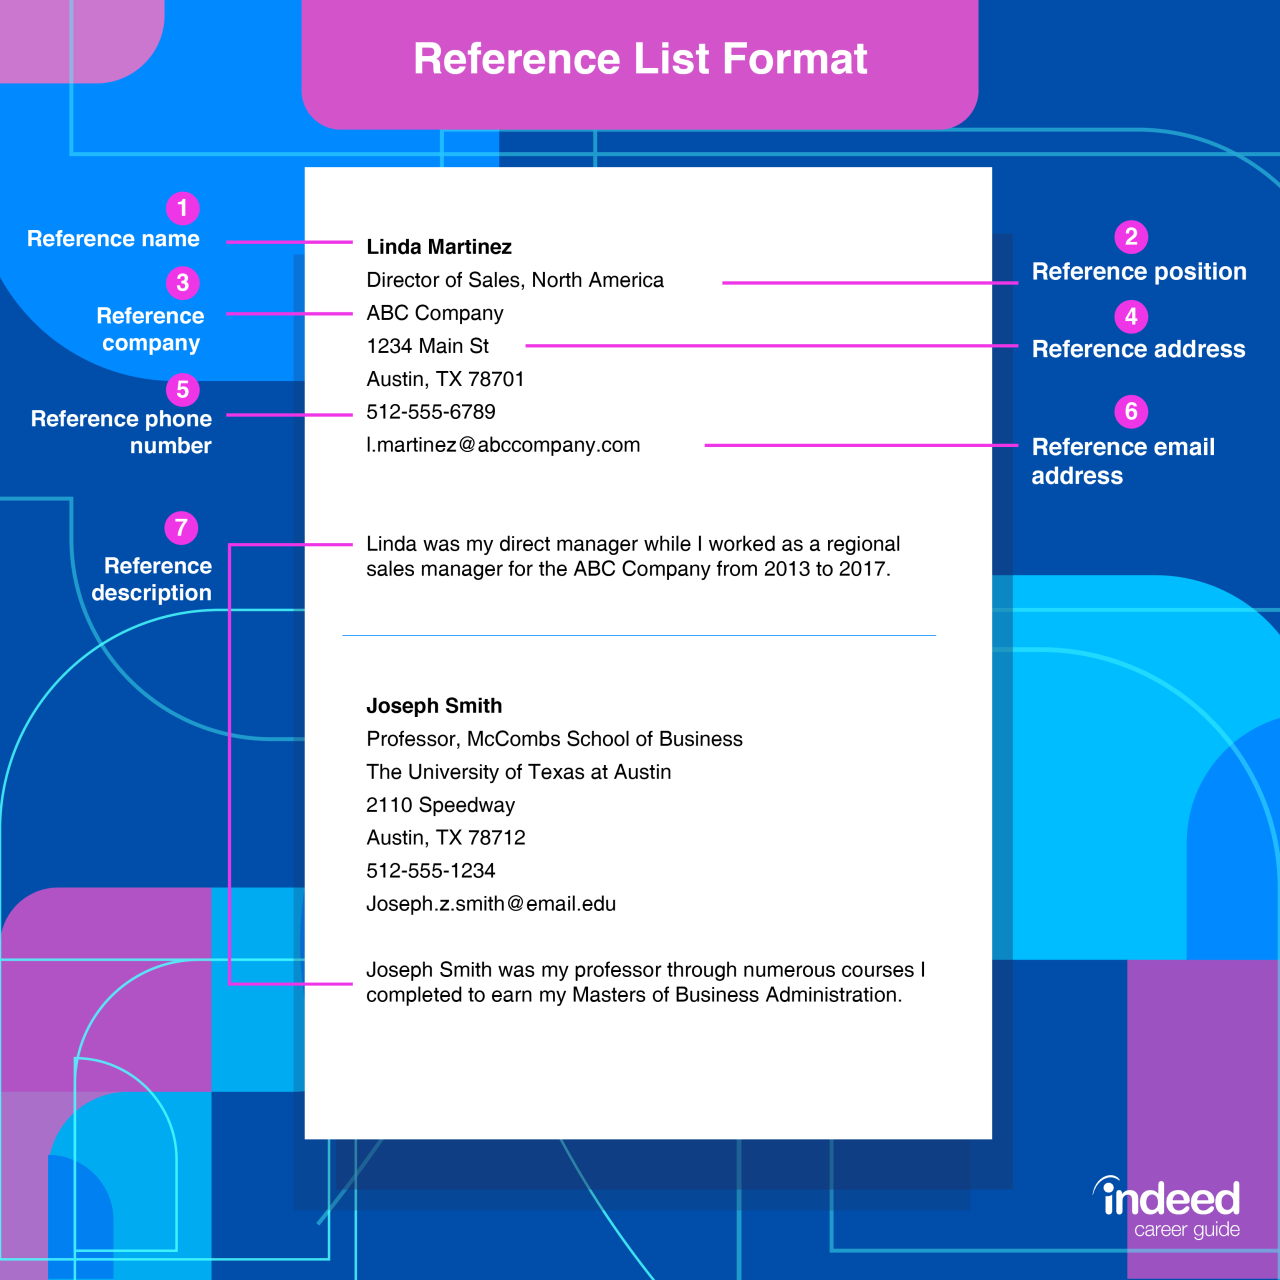 How to Write a Resume Reference List (With Examples)